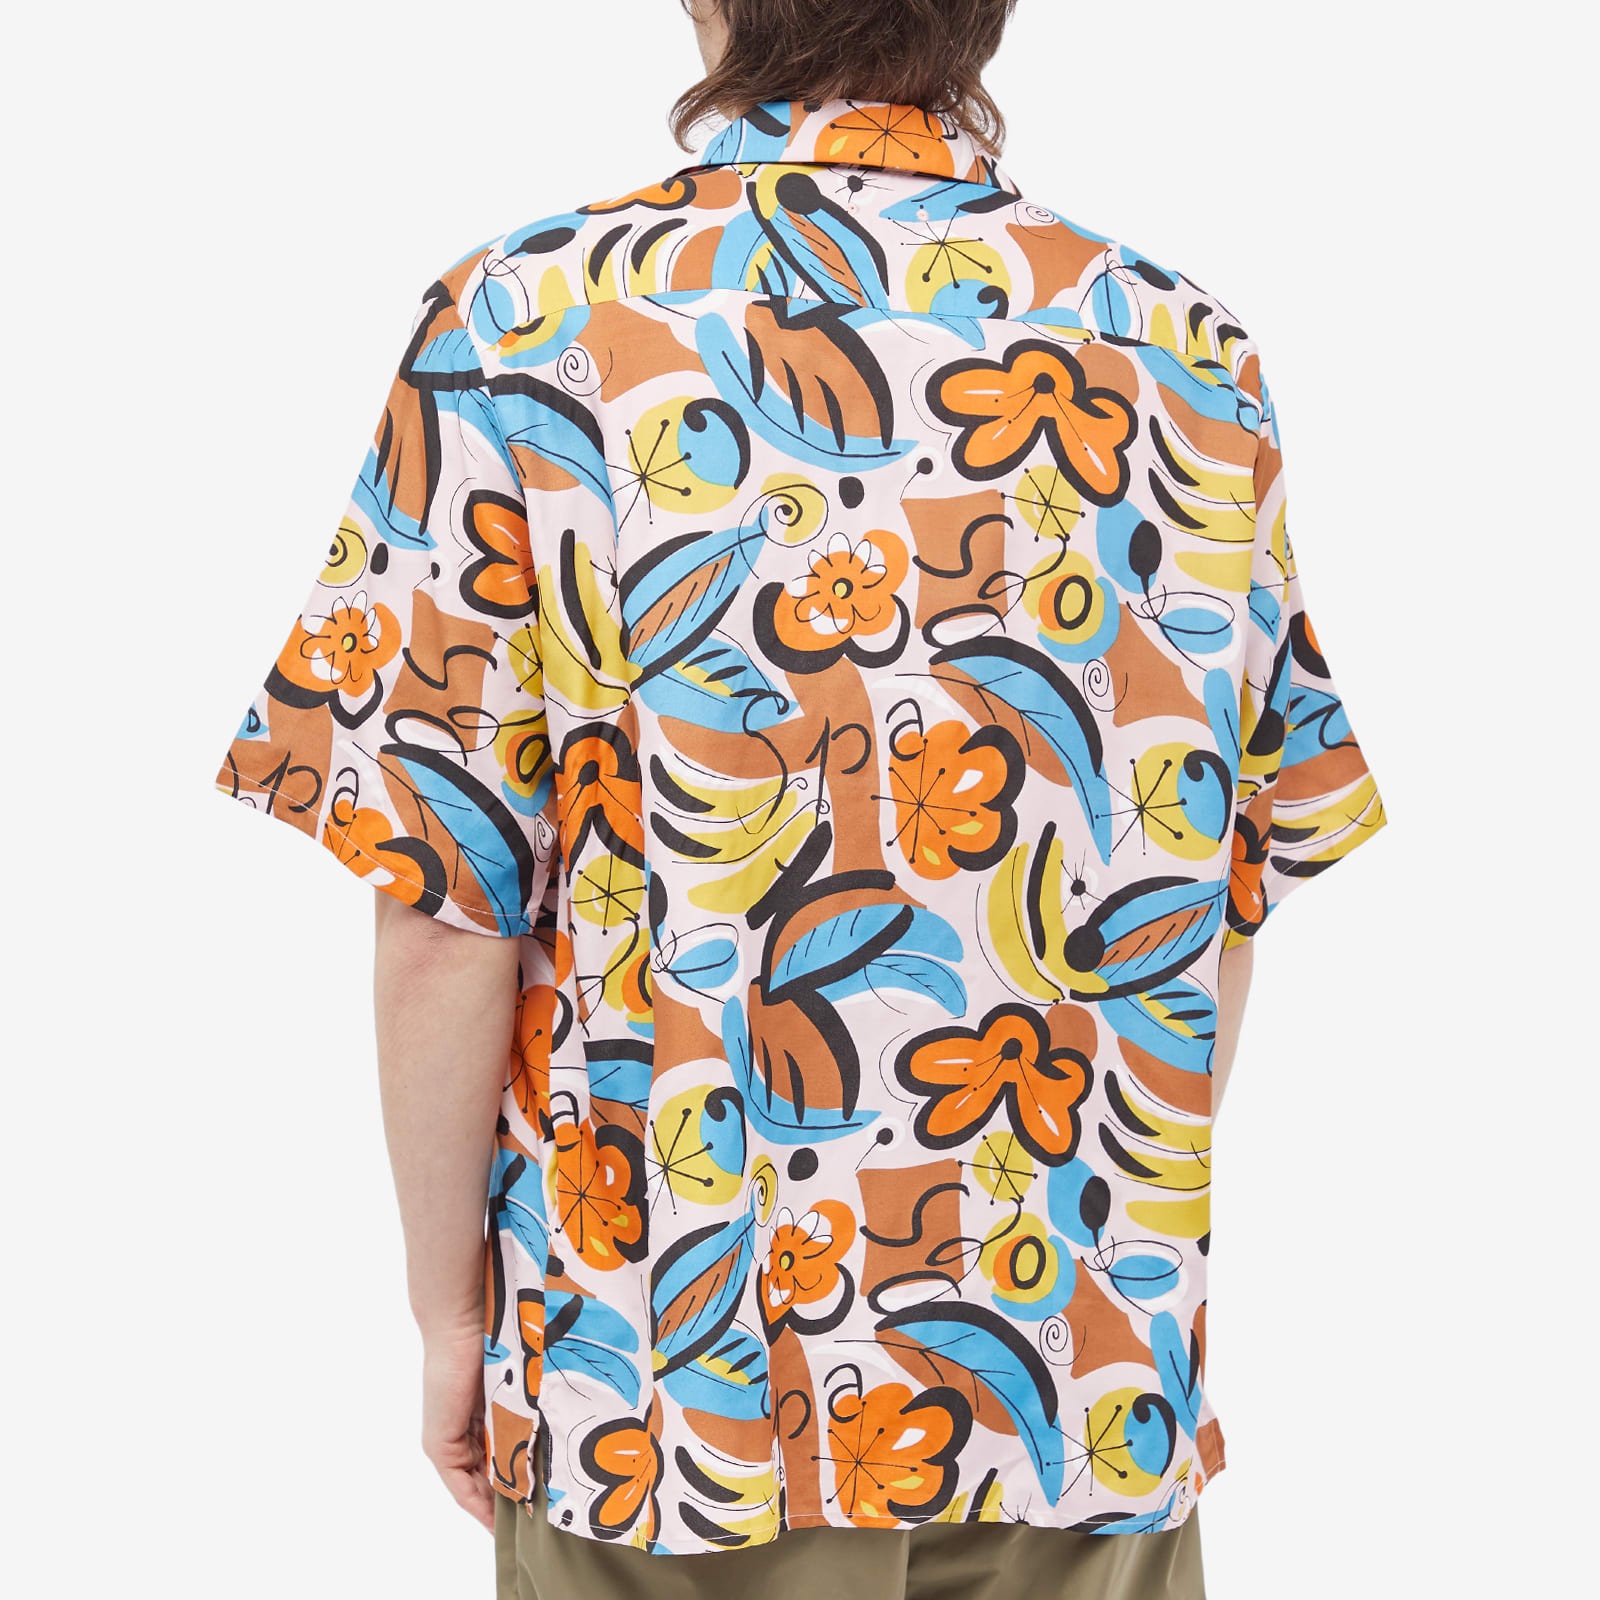 SOPHNET. Patterned Vacation Shirt - 3